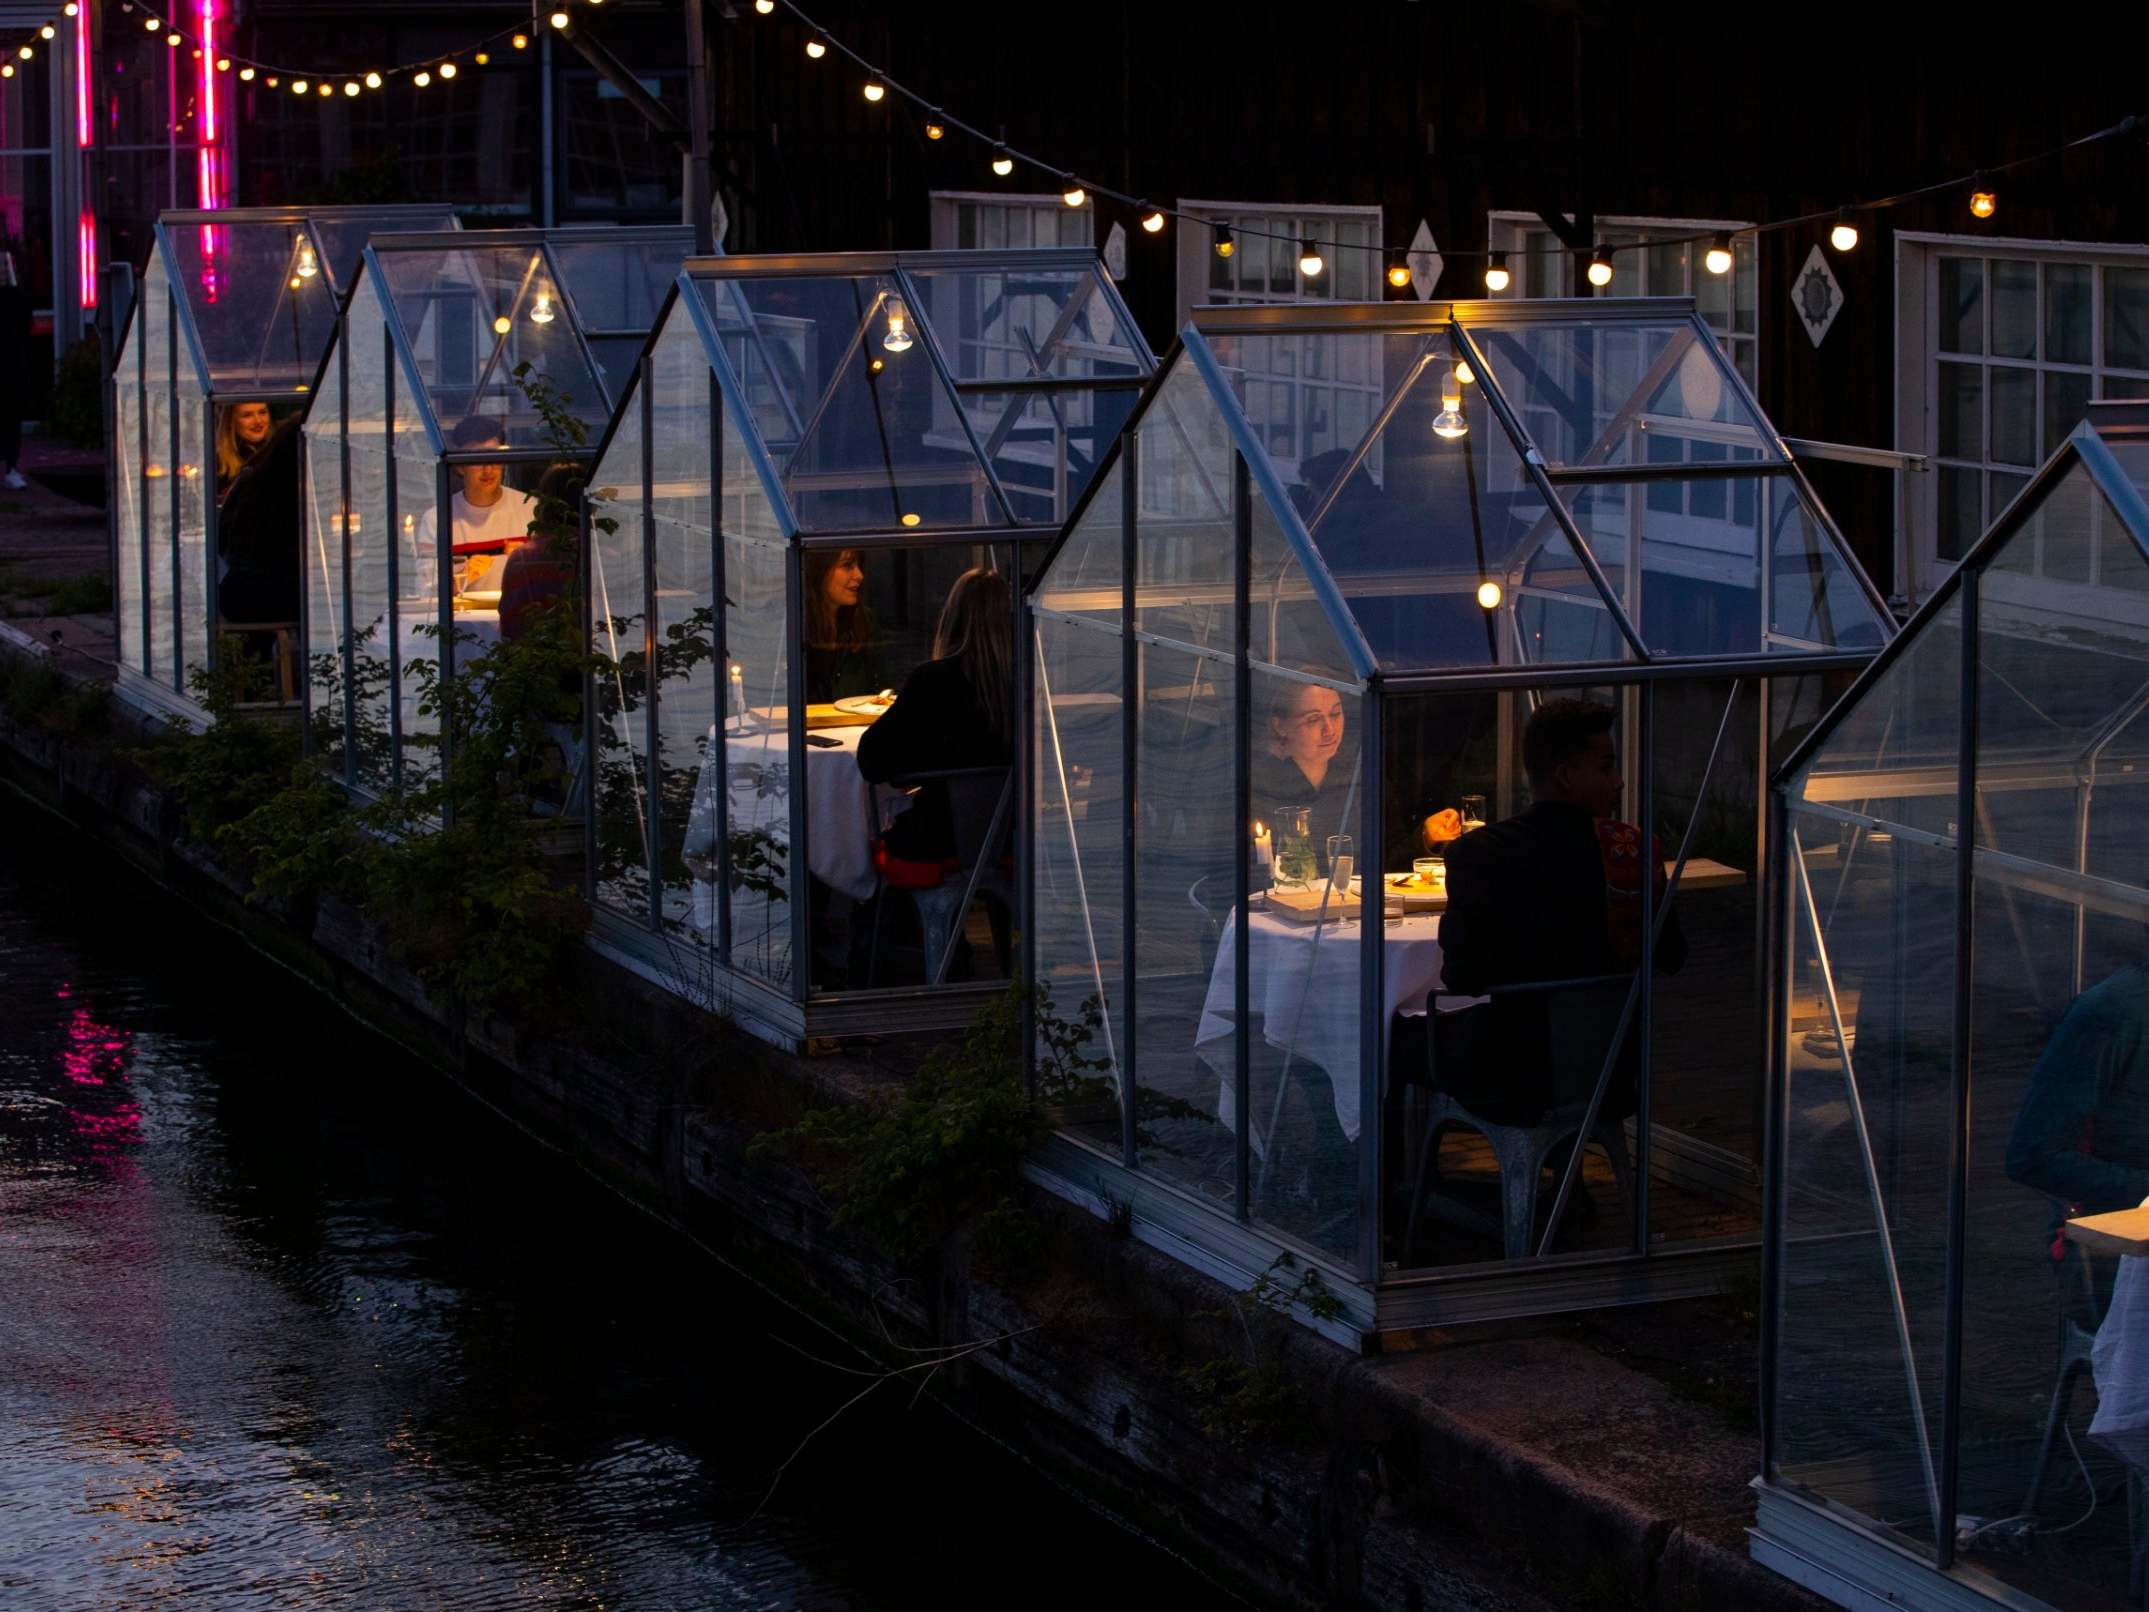 Maak avondeten Knooppunt bevind zich Amsterdam restaurant creates small greenhouses for diners to enjoy meals  while social distancing | The Independent | The Independent